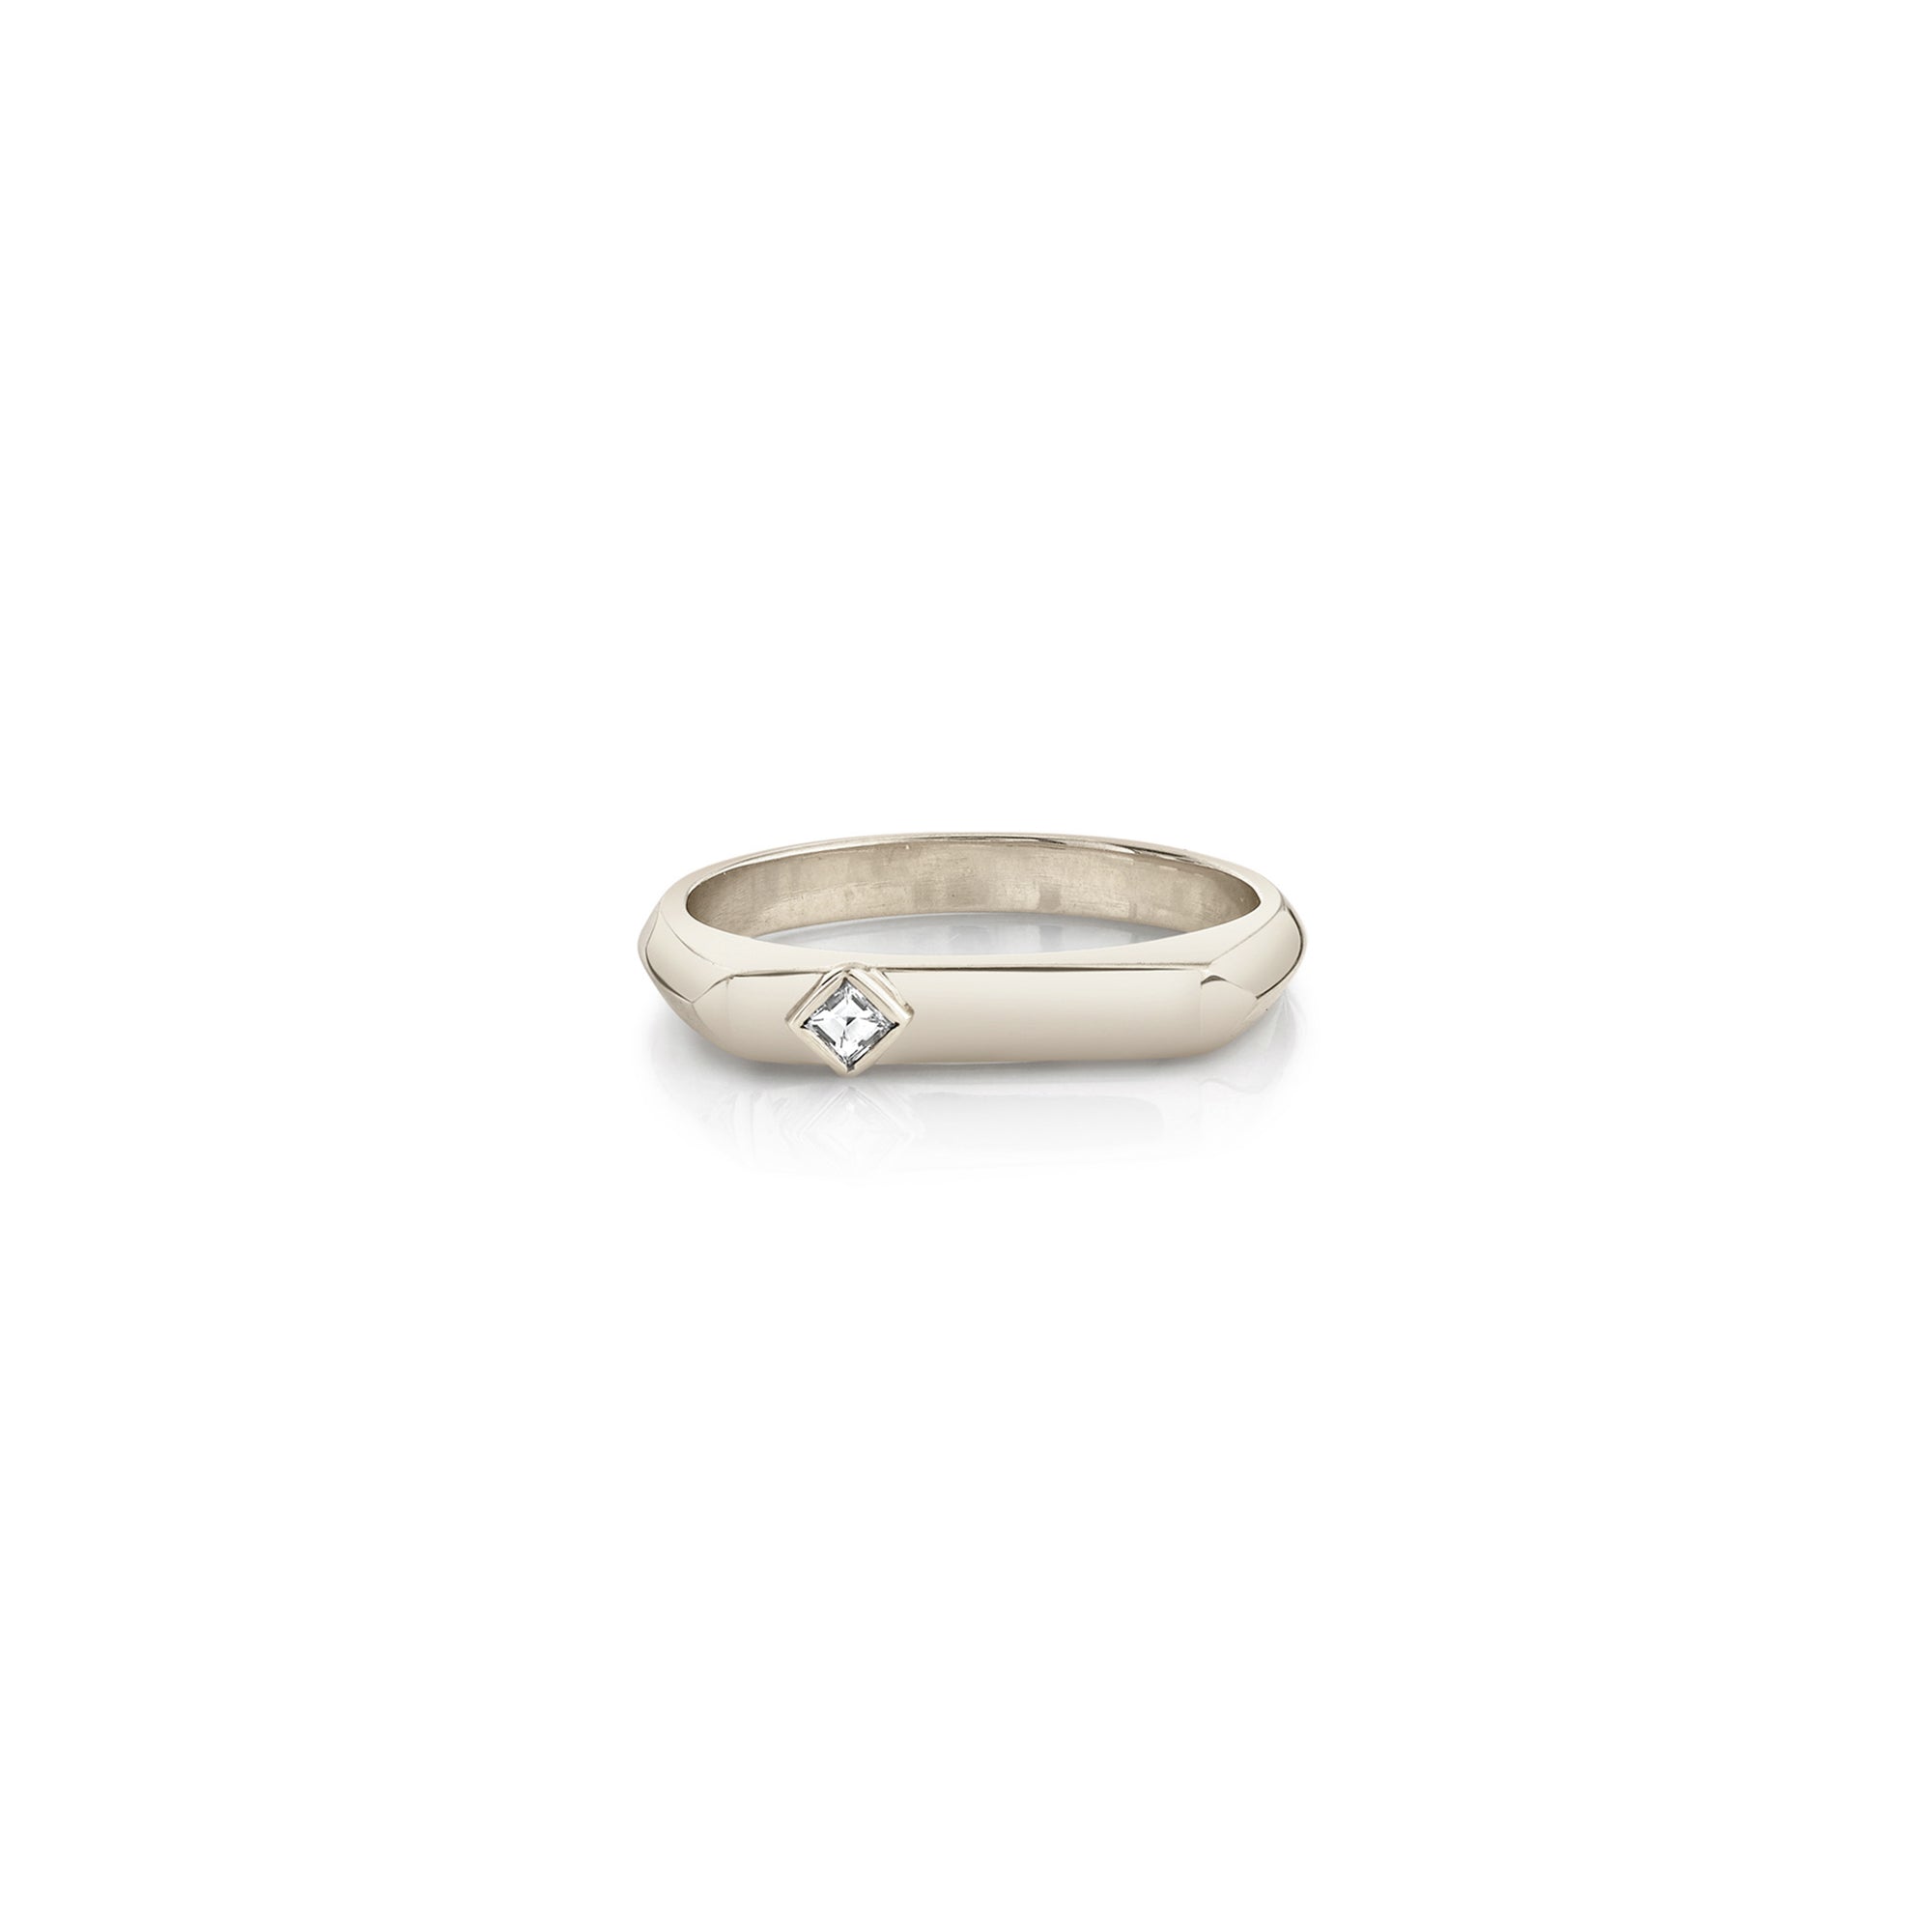 Sterling Silver Flat Top Ring - 6.8 Grams - Size 8 - Measures 6mm Wide -  Walmart.com